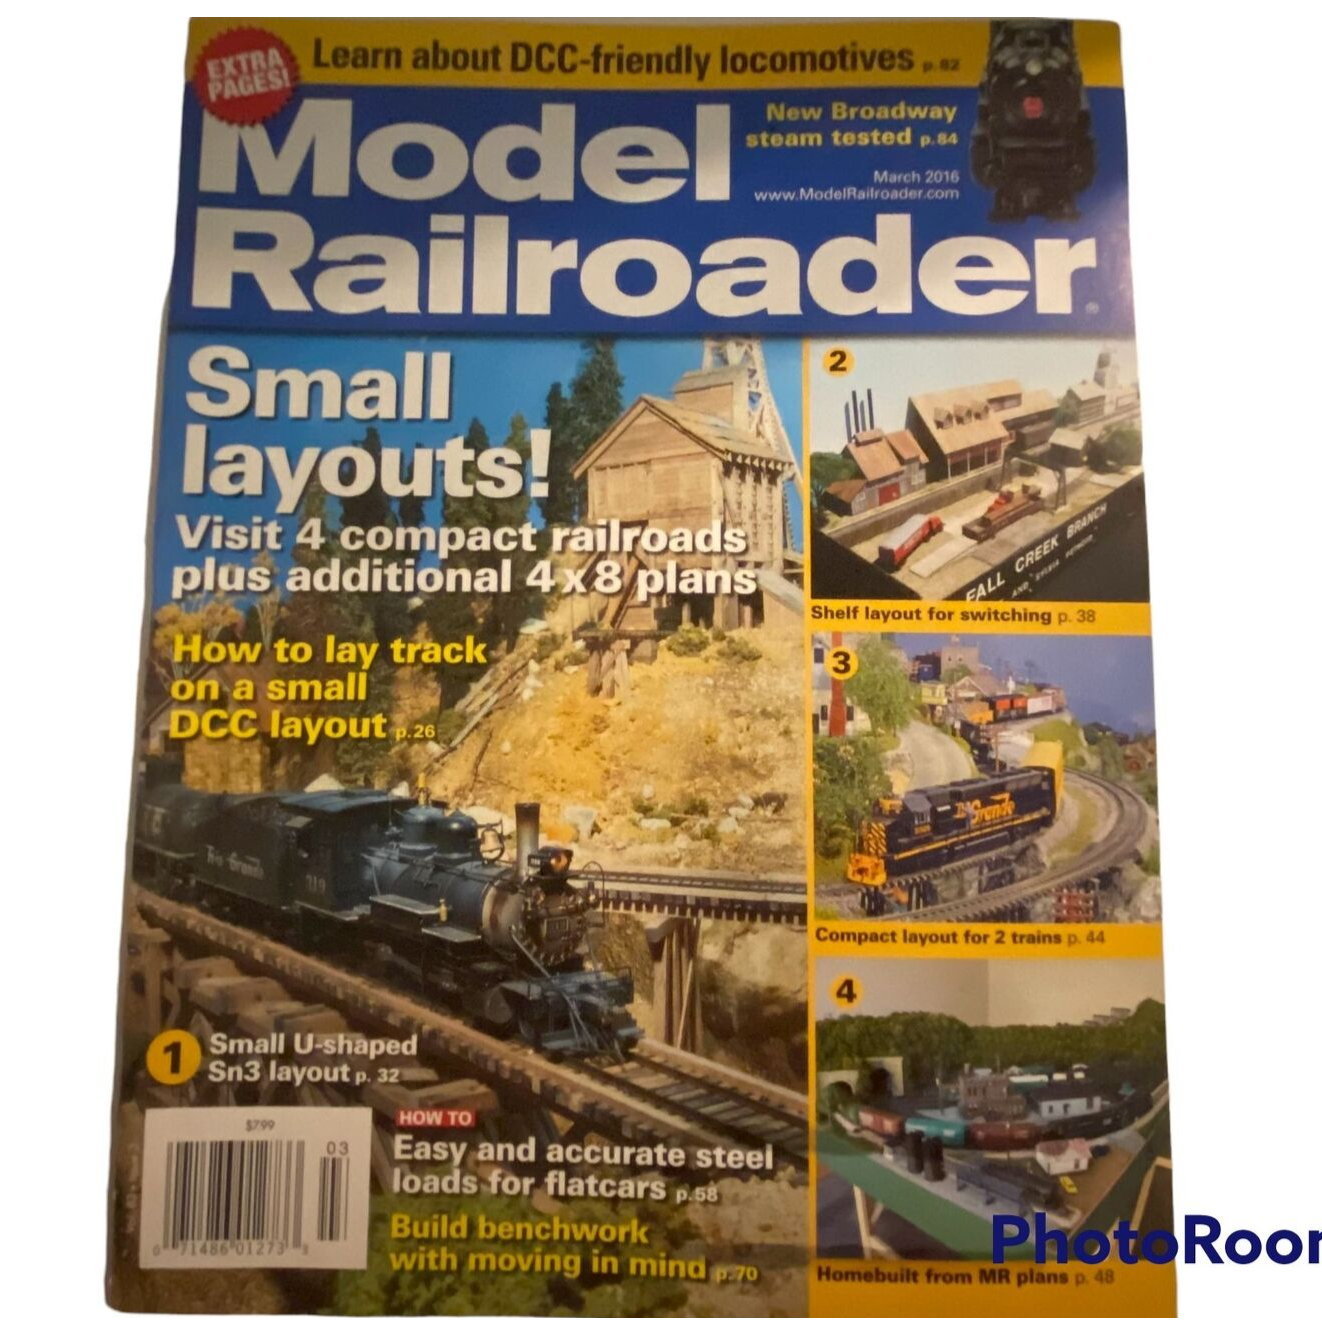 Primary image for Model Railroader March 2016 Easy Accurate Steel Loads Small Layouts Benchwork